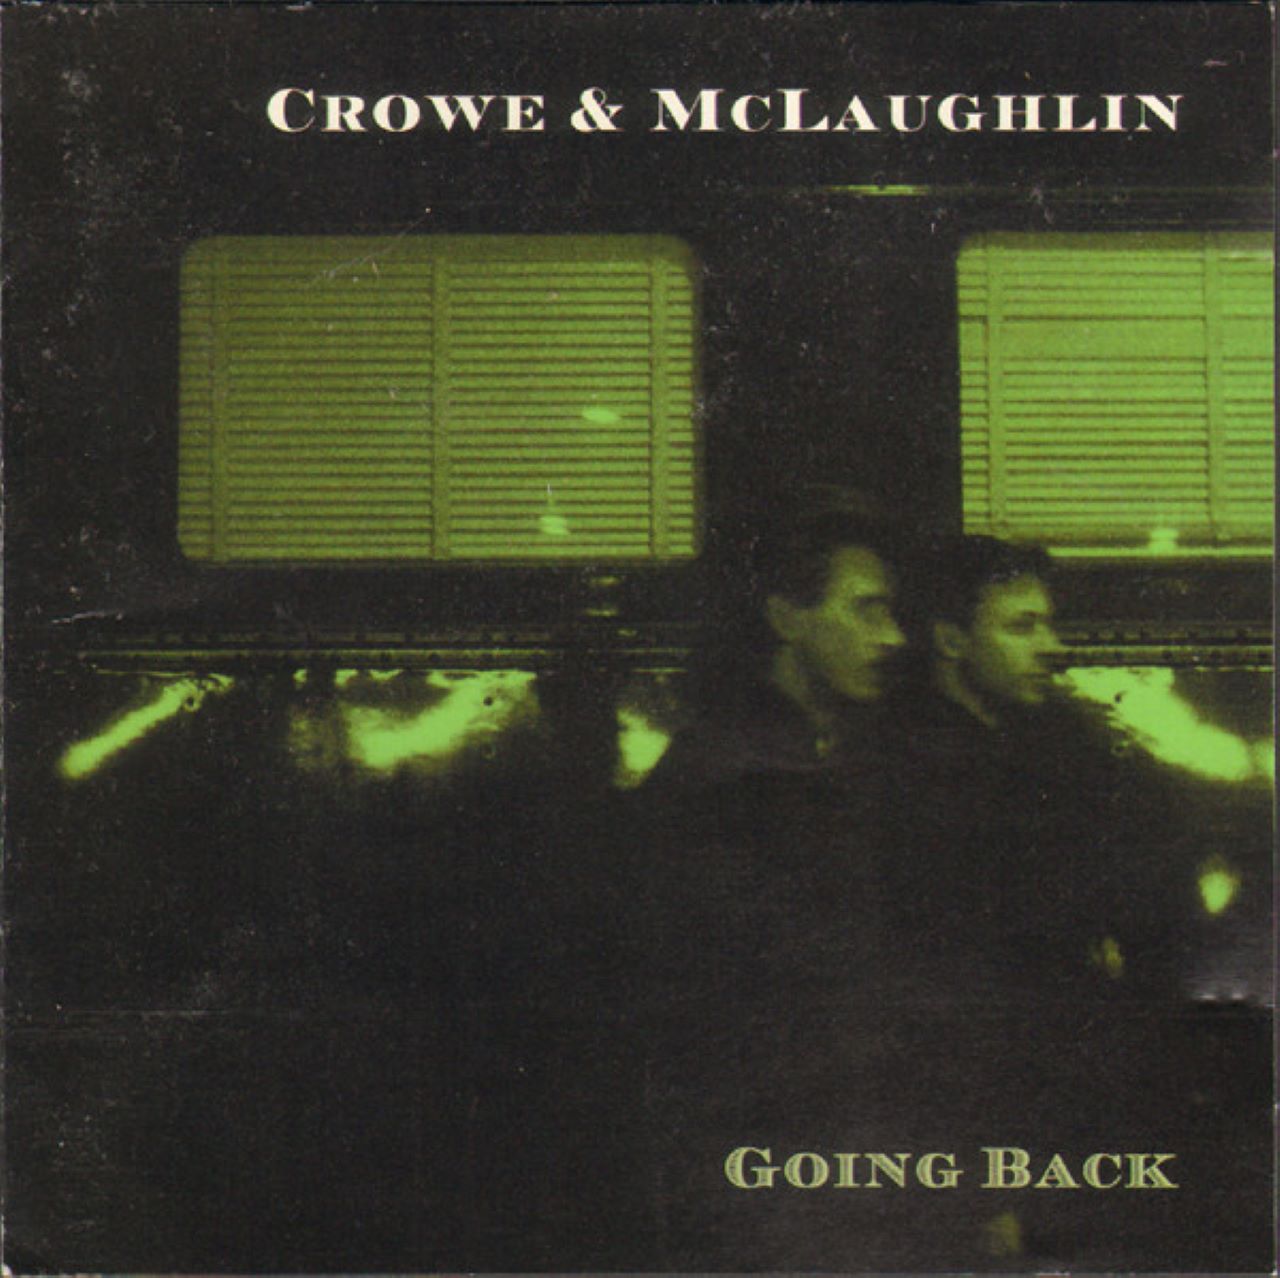 Crowe & McLaughlin - Going Back cover album